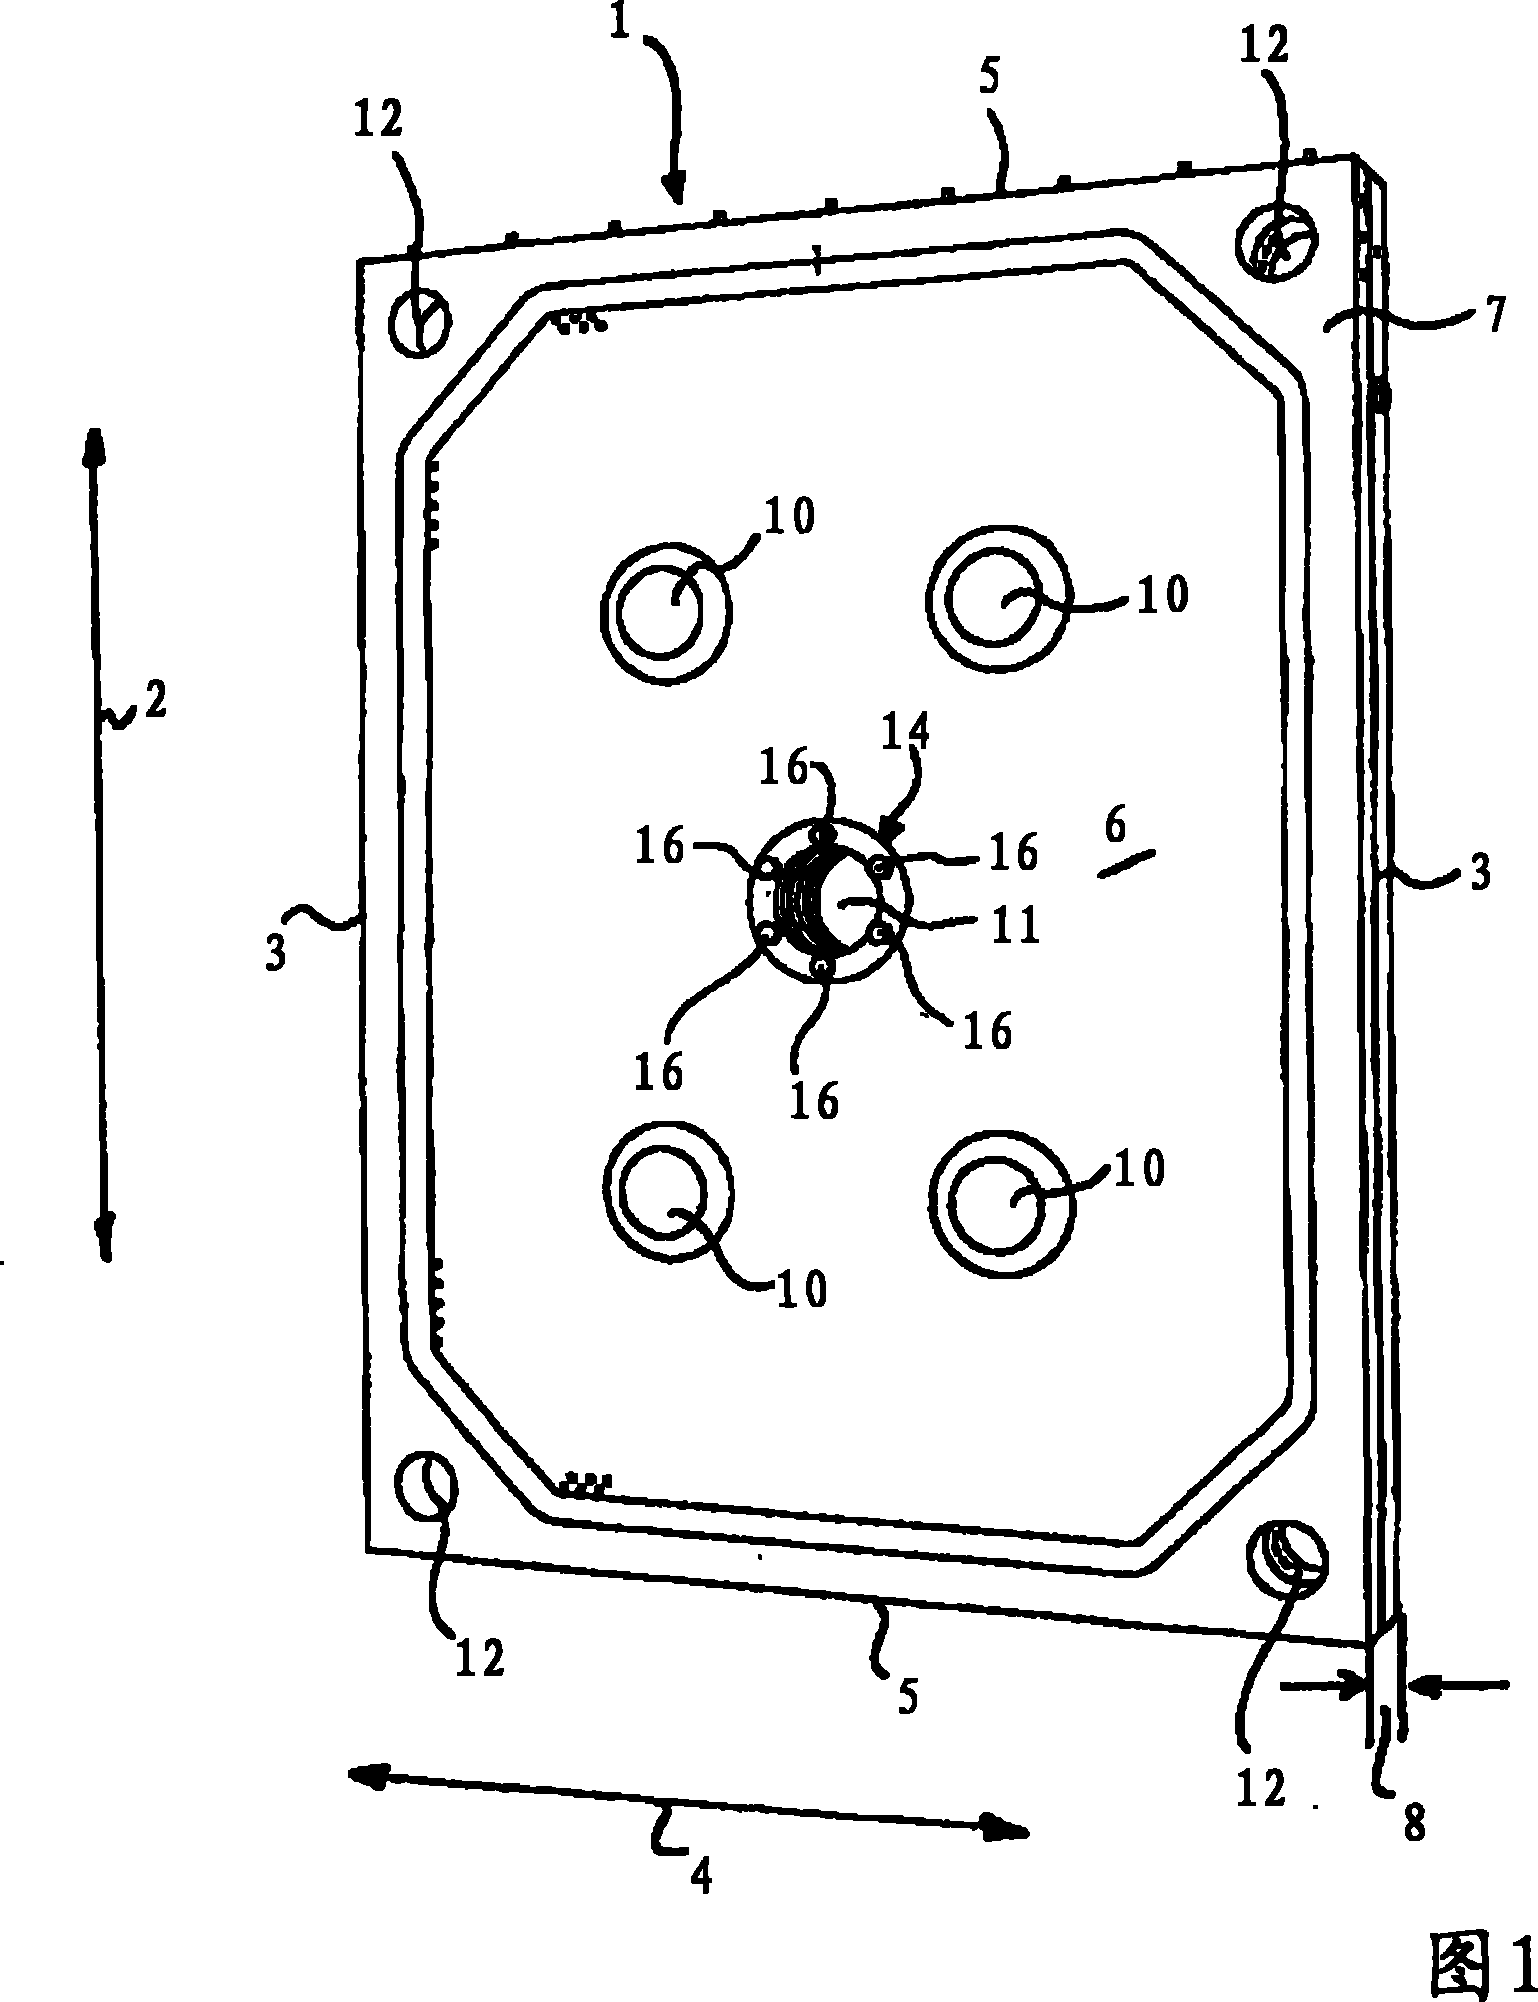 Chamber filter plate